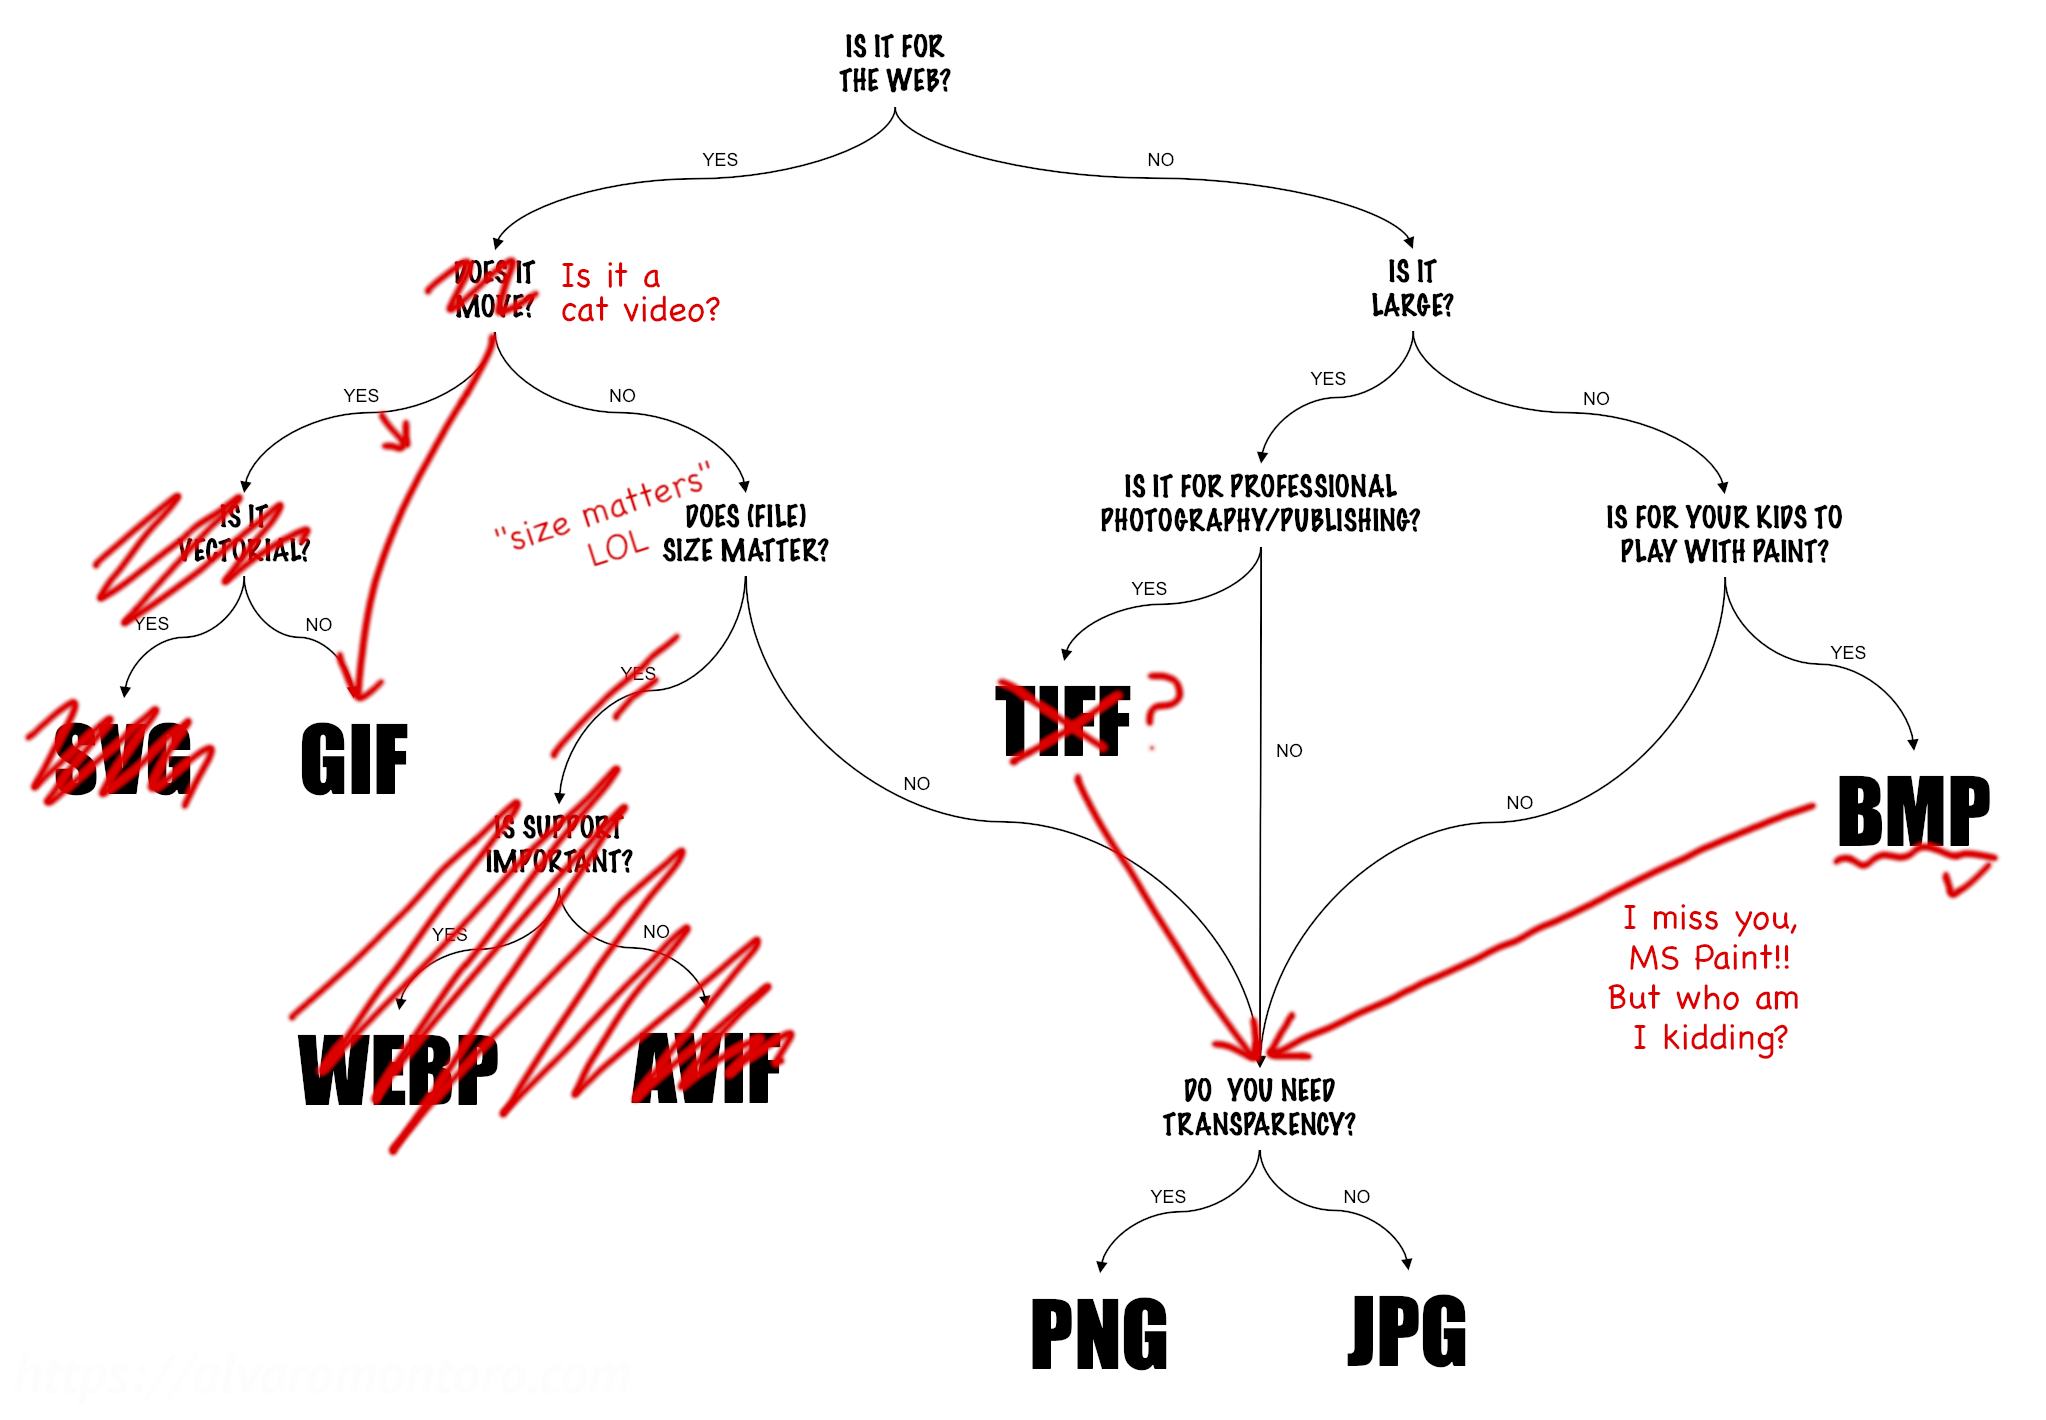 Same flowchart as above, but all the formats are scratched except for GIF, JPG, and PNG. There's a line from BMP to JPG/PNG saying "I love you MSPaint, but who am I kidding?". The question "does it move?" was replaced by "is it a cat video?" and all the paths except that one direct to PNG/JPG